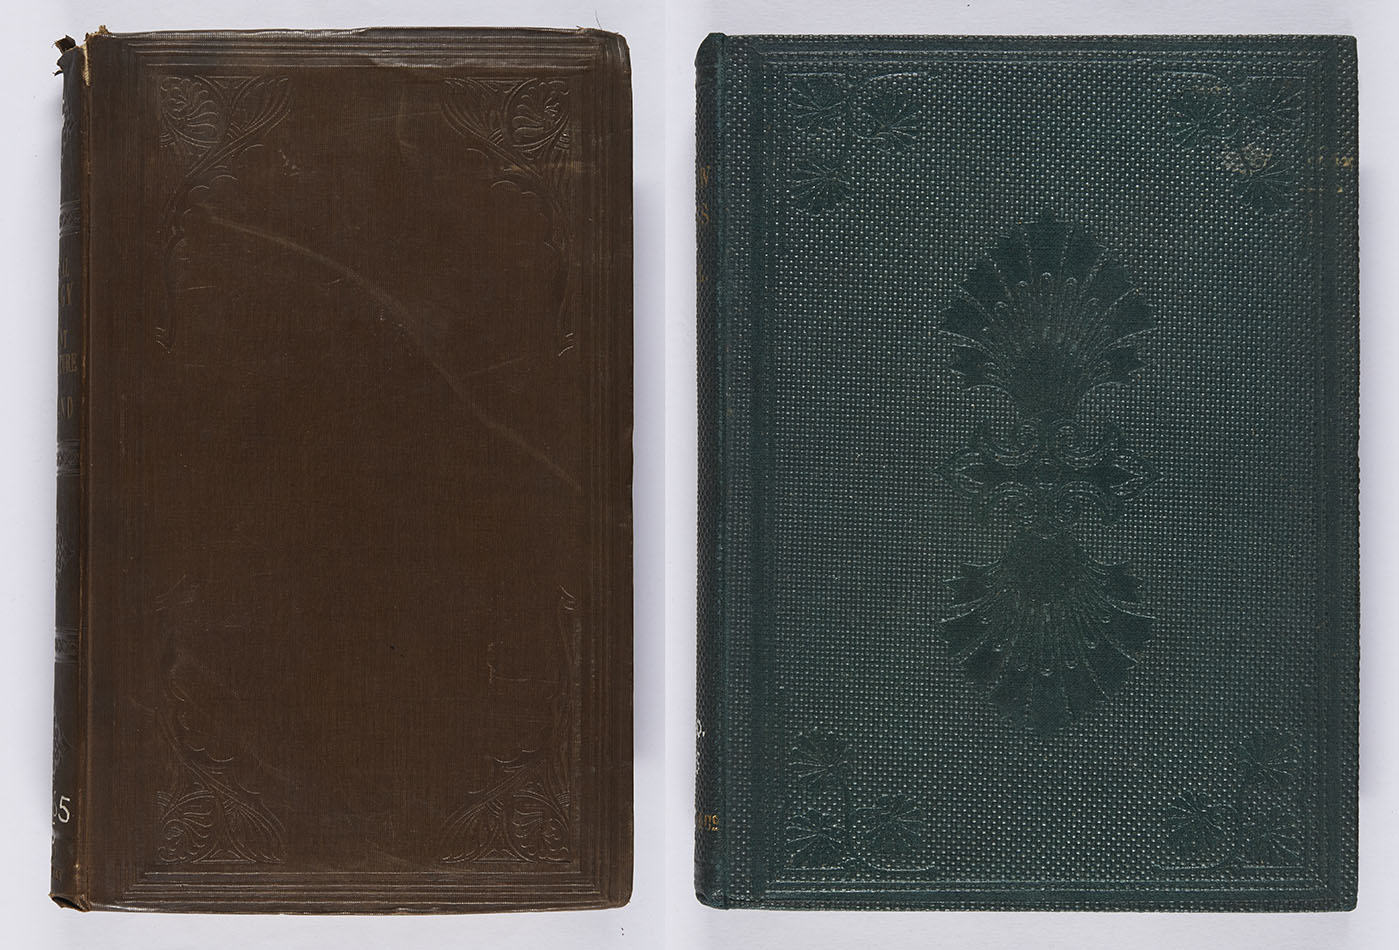 These two bindings combine a frame with cornerpieces, the second also having a blind centrepiece. George Wilkinson, Practical geology and ancient architecture of Ireland (London: John Murray, 1845), r QE265.W5 ; James Russell Lowell, The Biglow papers (London: Trübner & Co., 1859), r PS2330.L7B5.